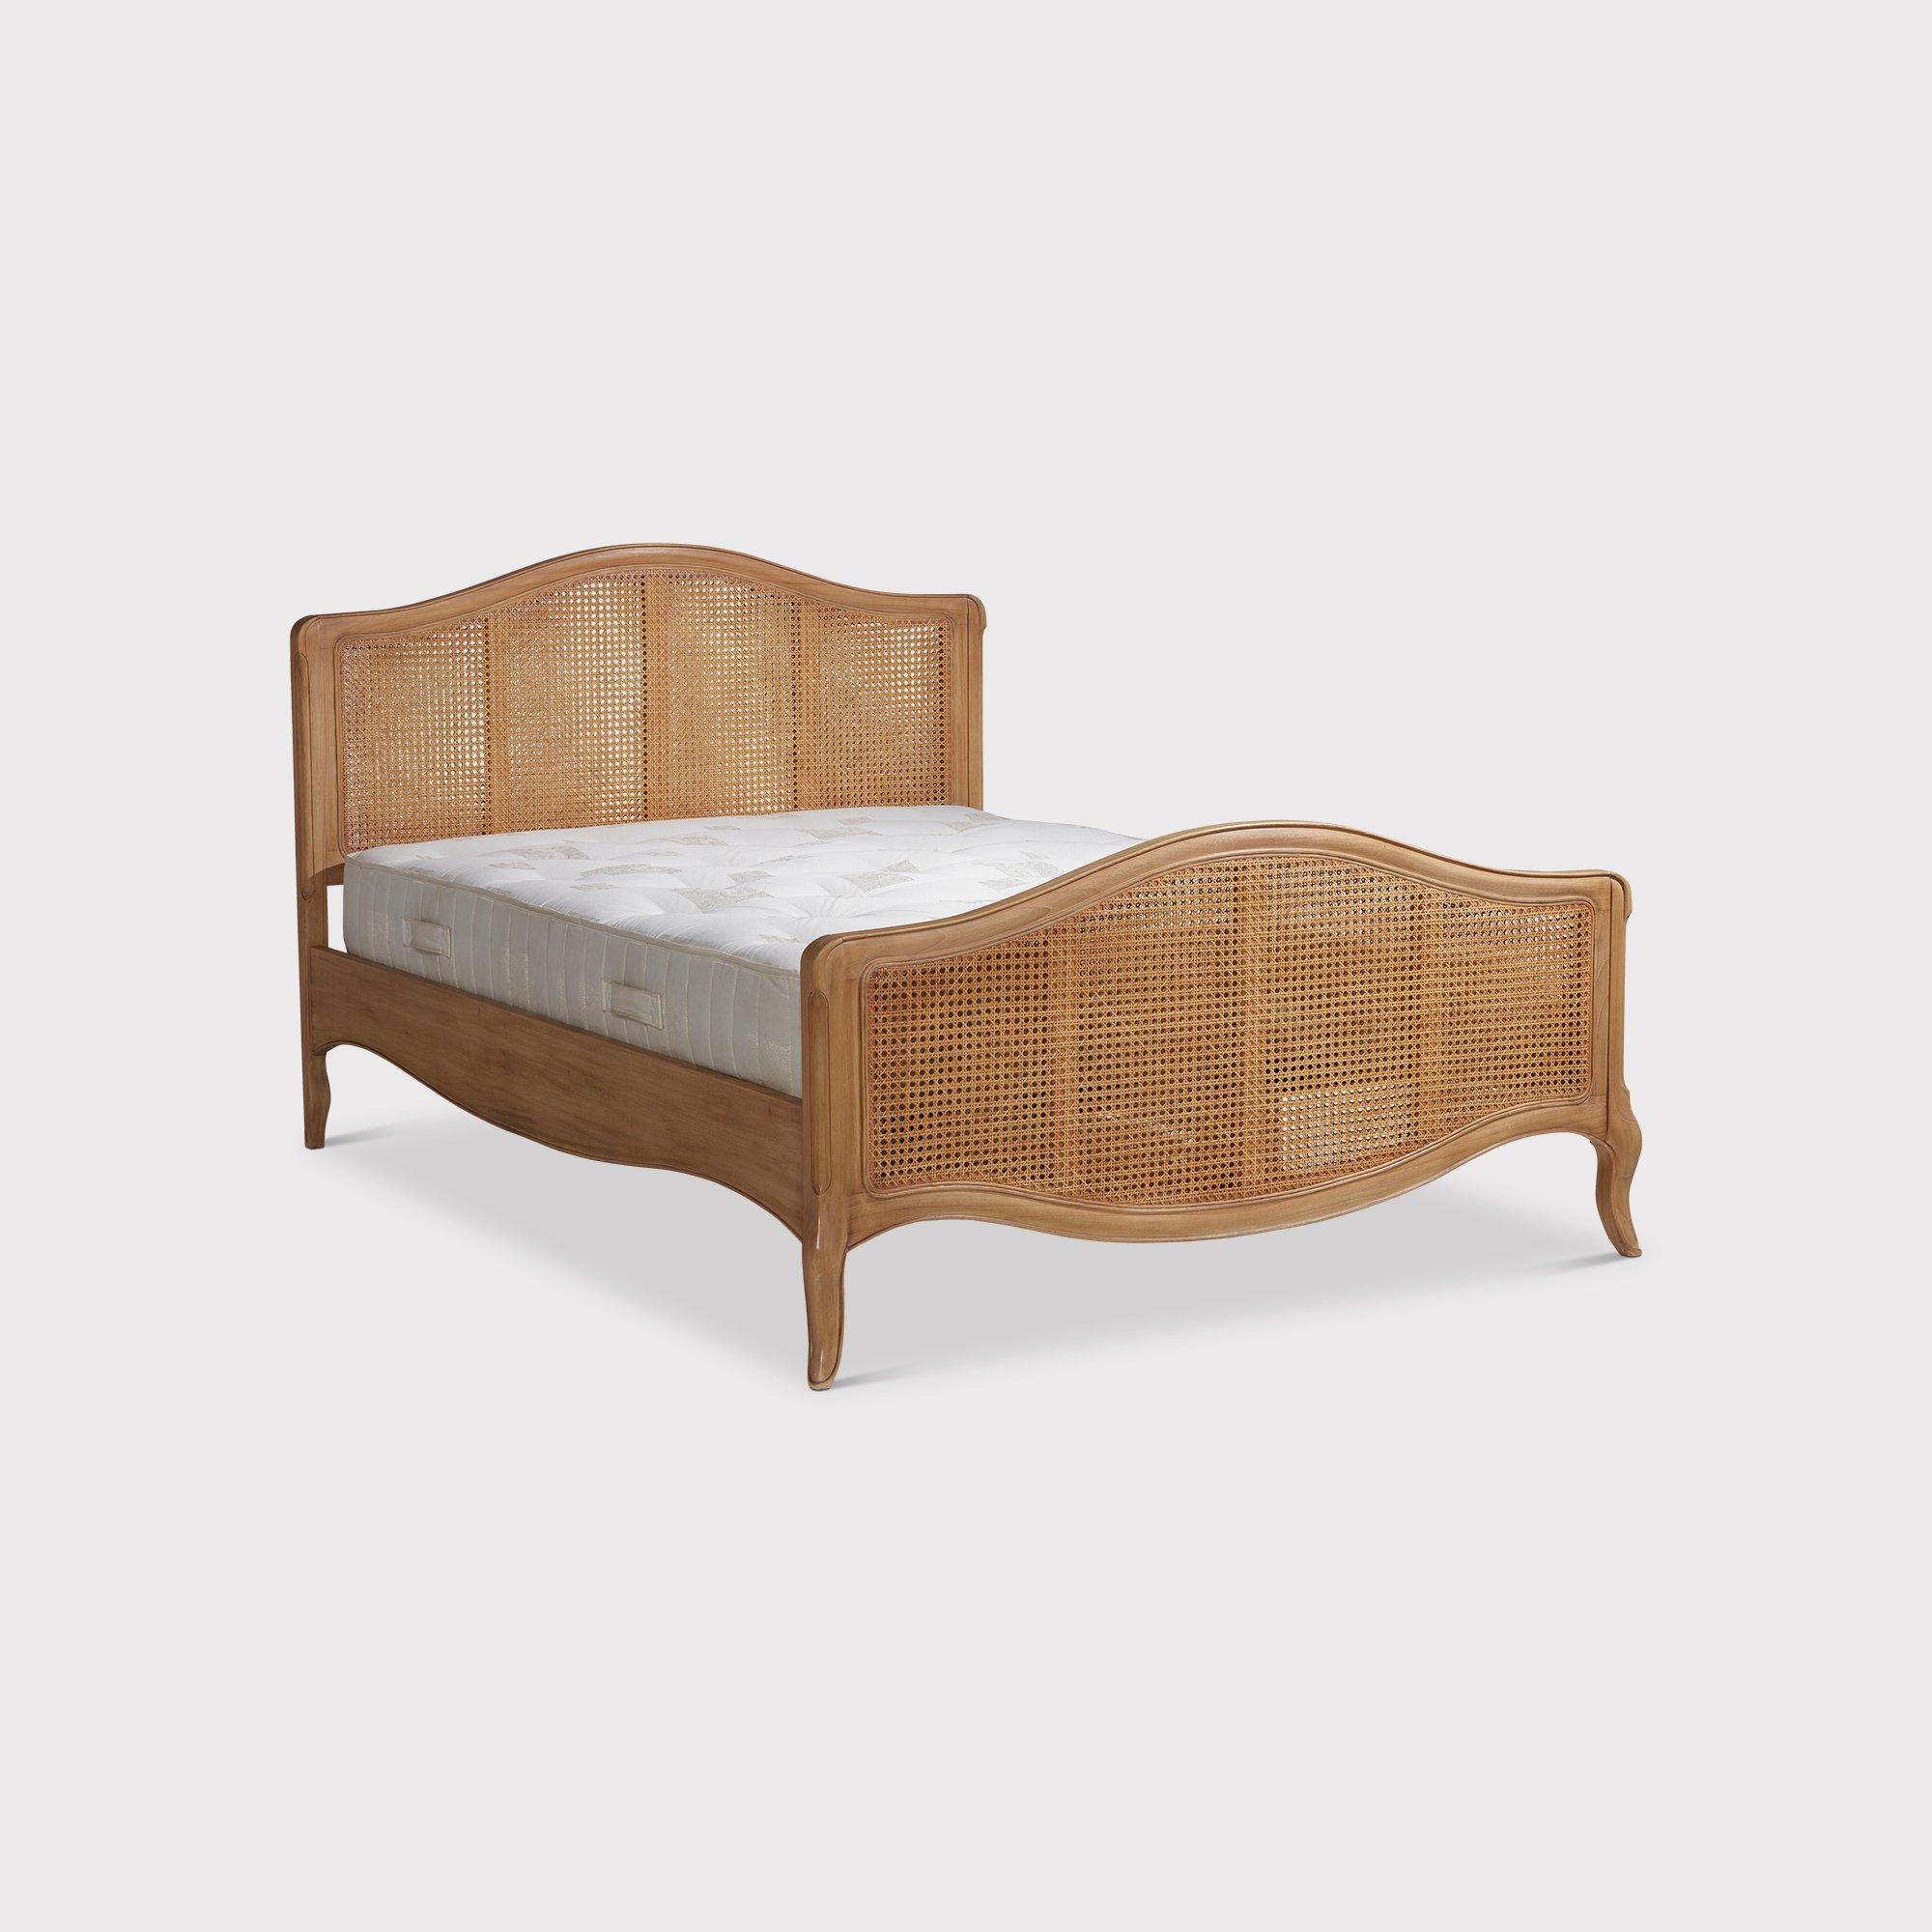 Cecile 135cm Bedstead, Neutral Wood | Double | Barker & Stonehouse